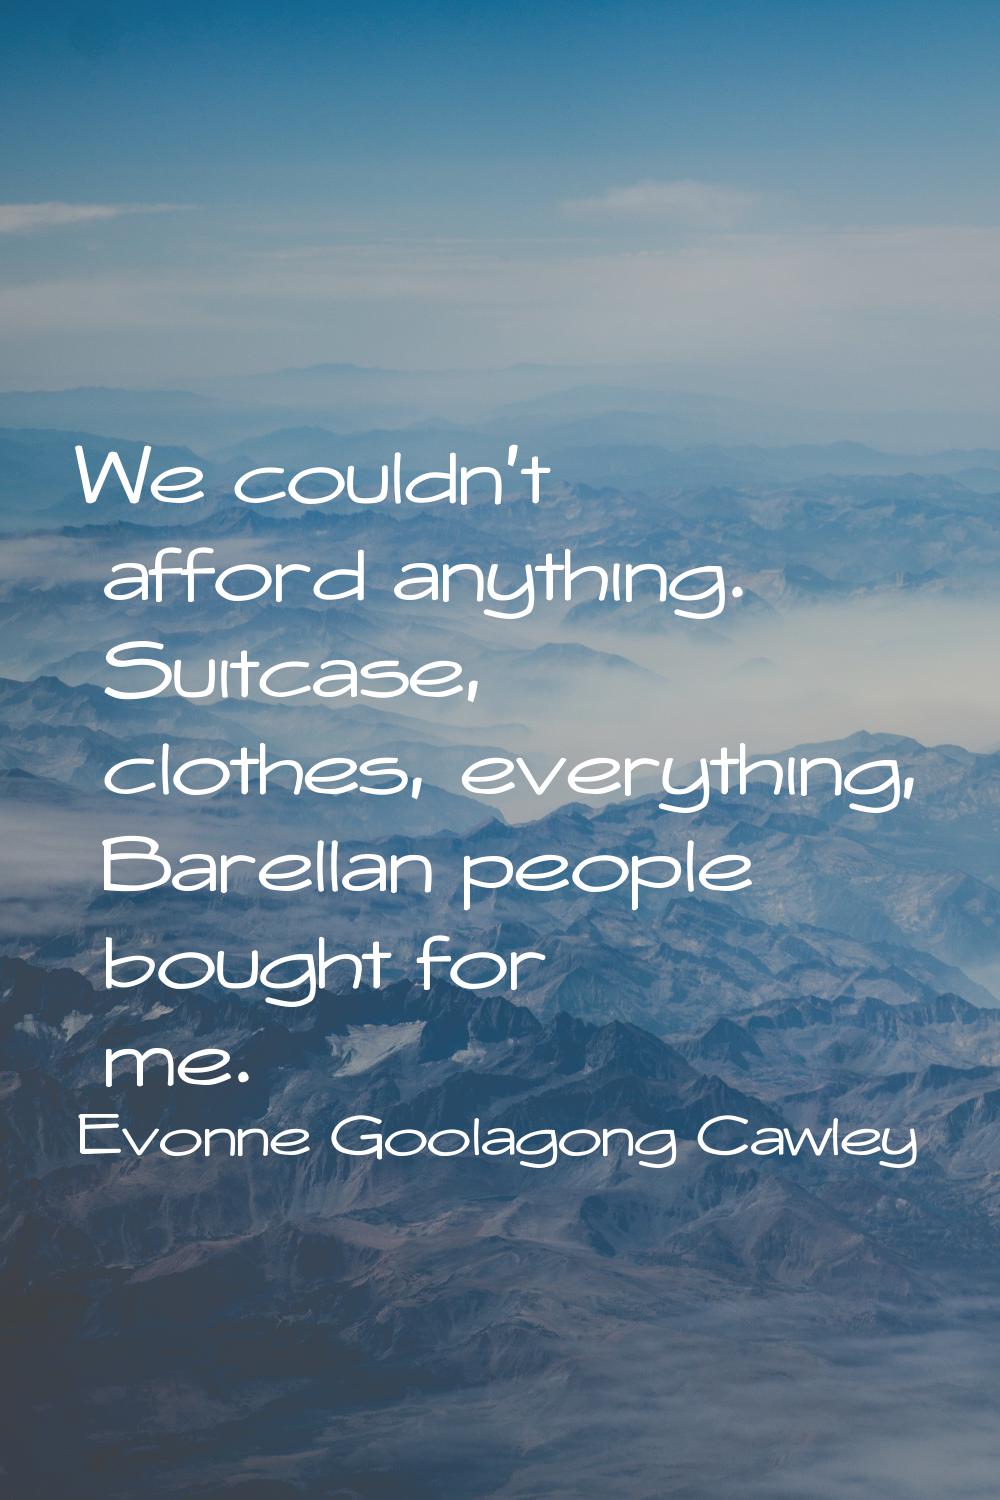 We couldn't afford anything. Suitcase, clothes, everything, Barellan people bought for me.